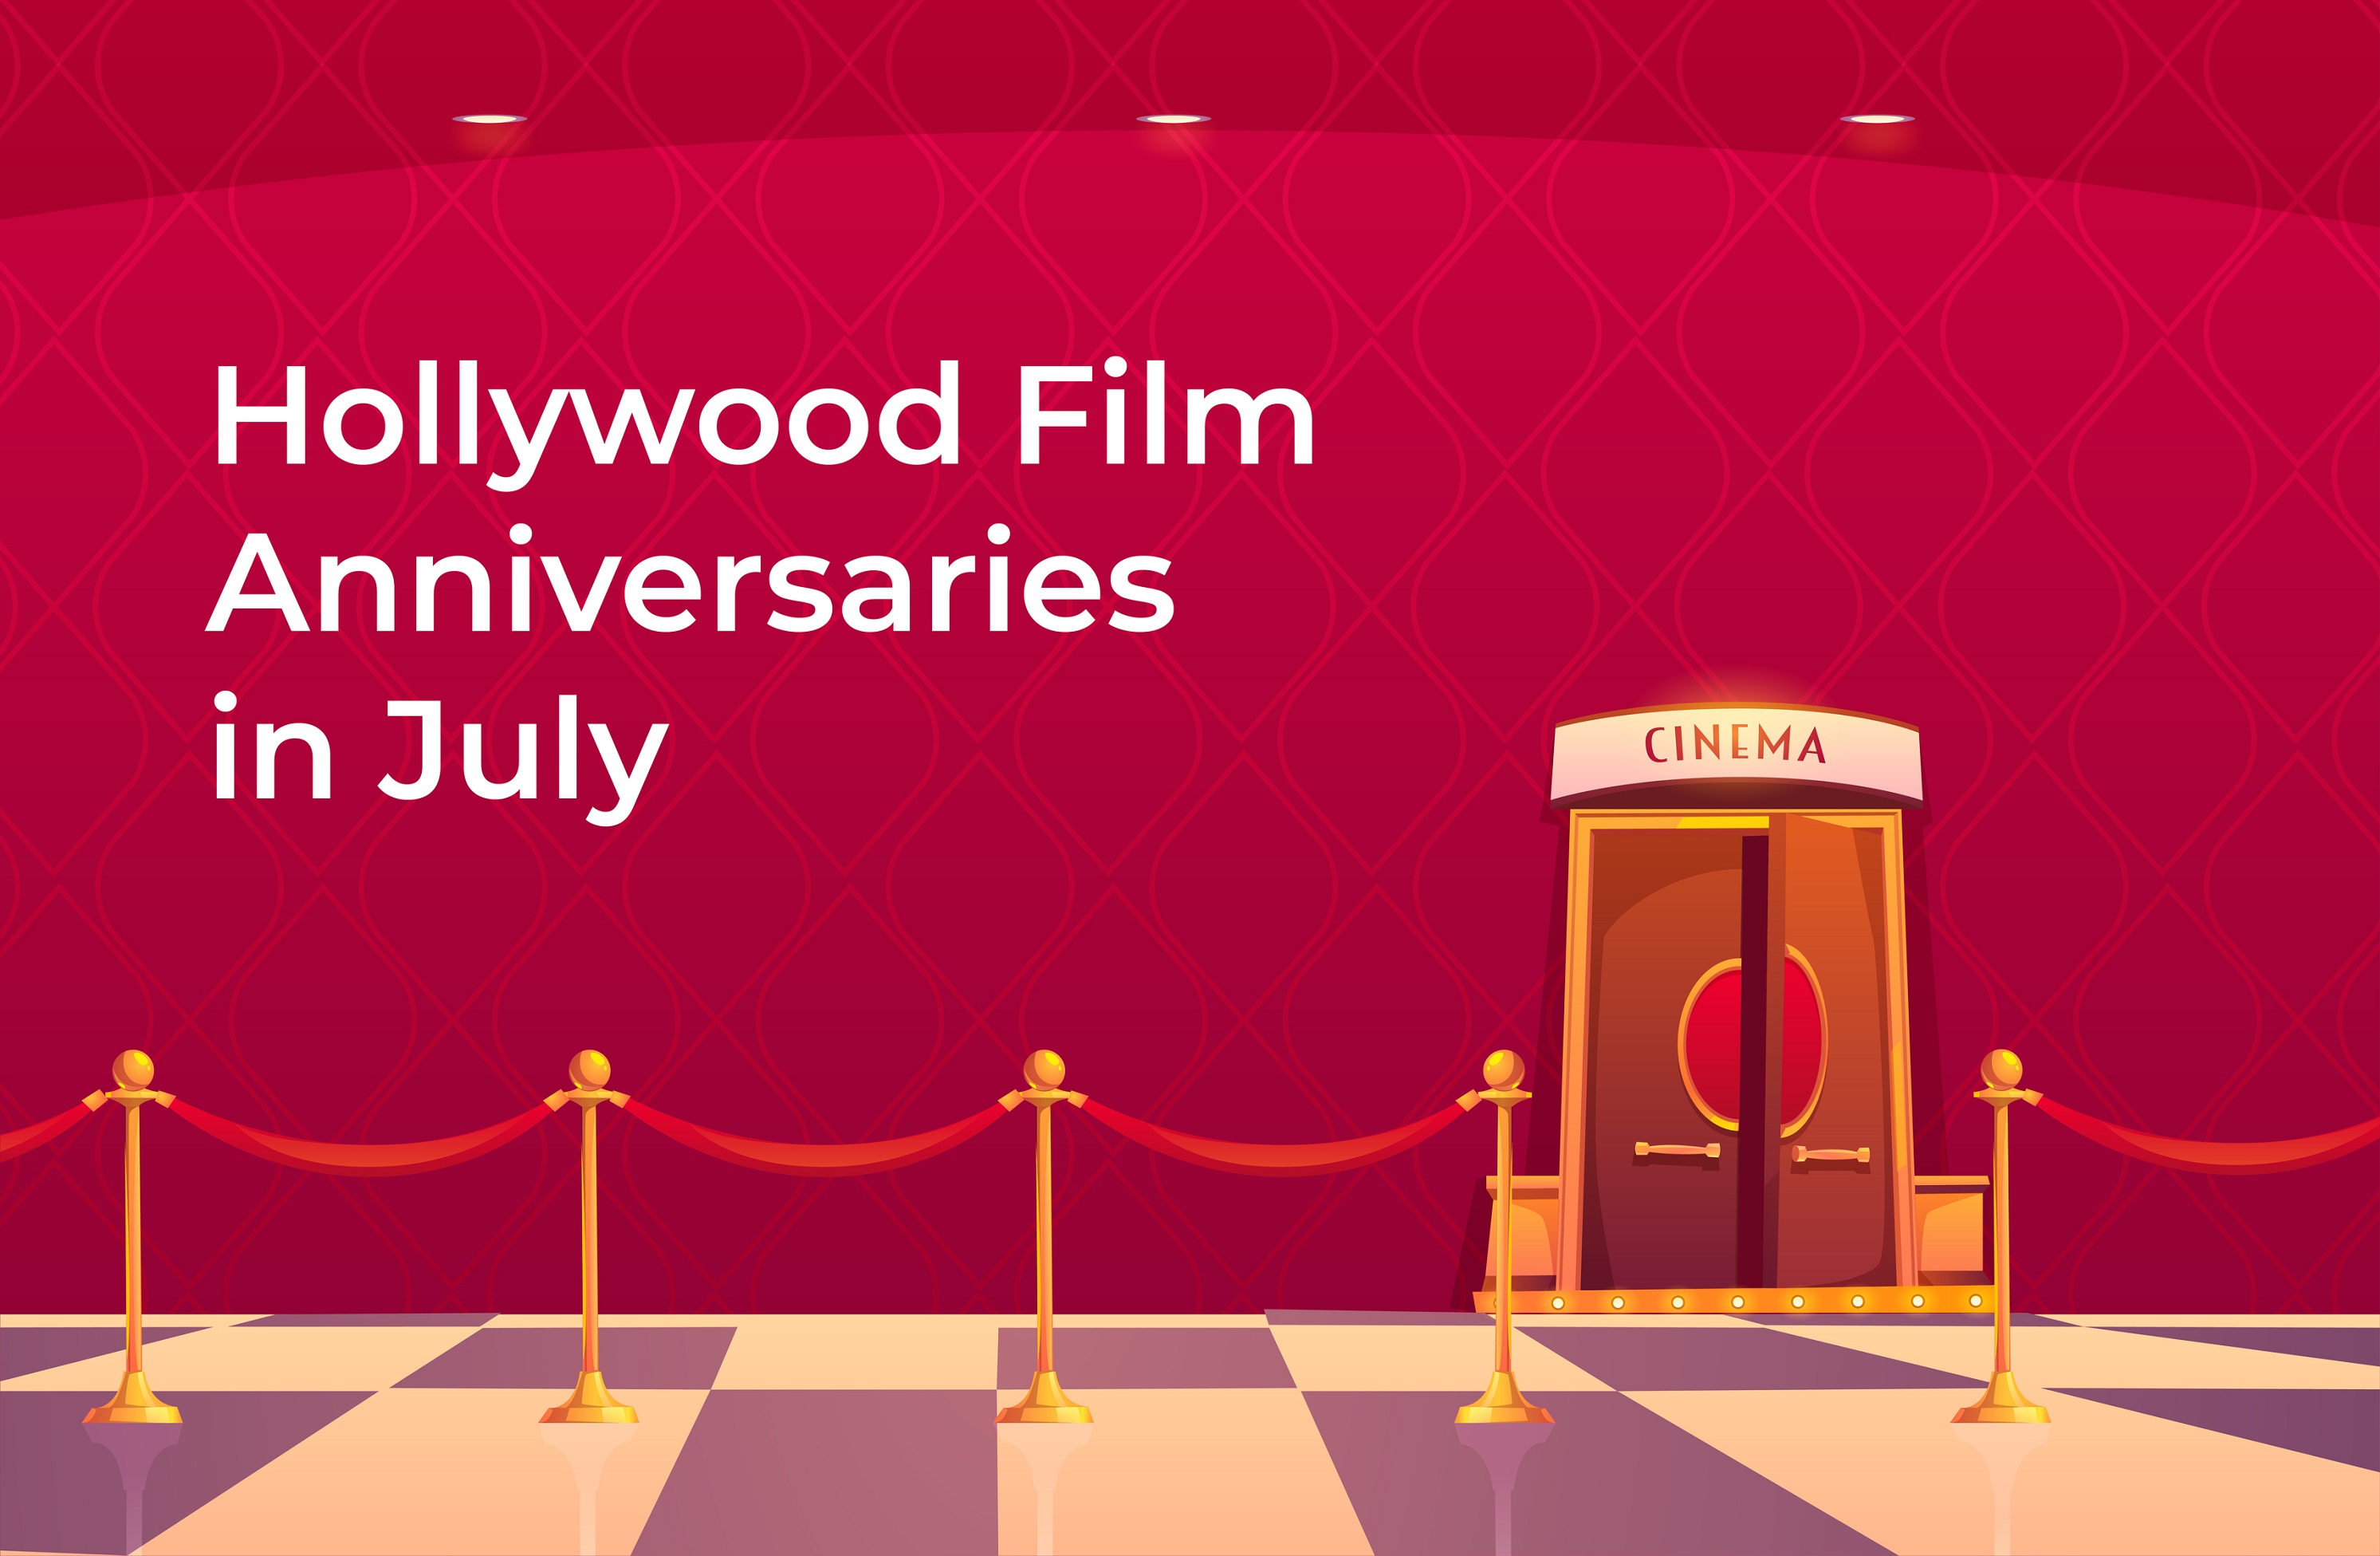 Hollywood Movies Celebrating their Anniversary in July